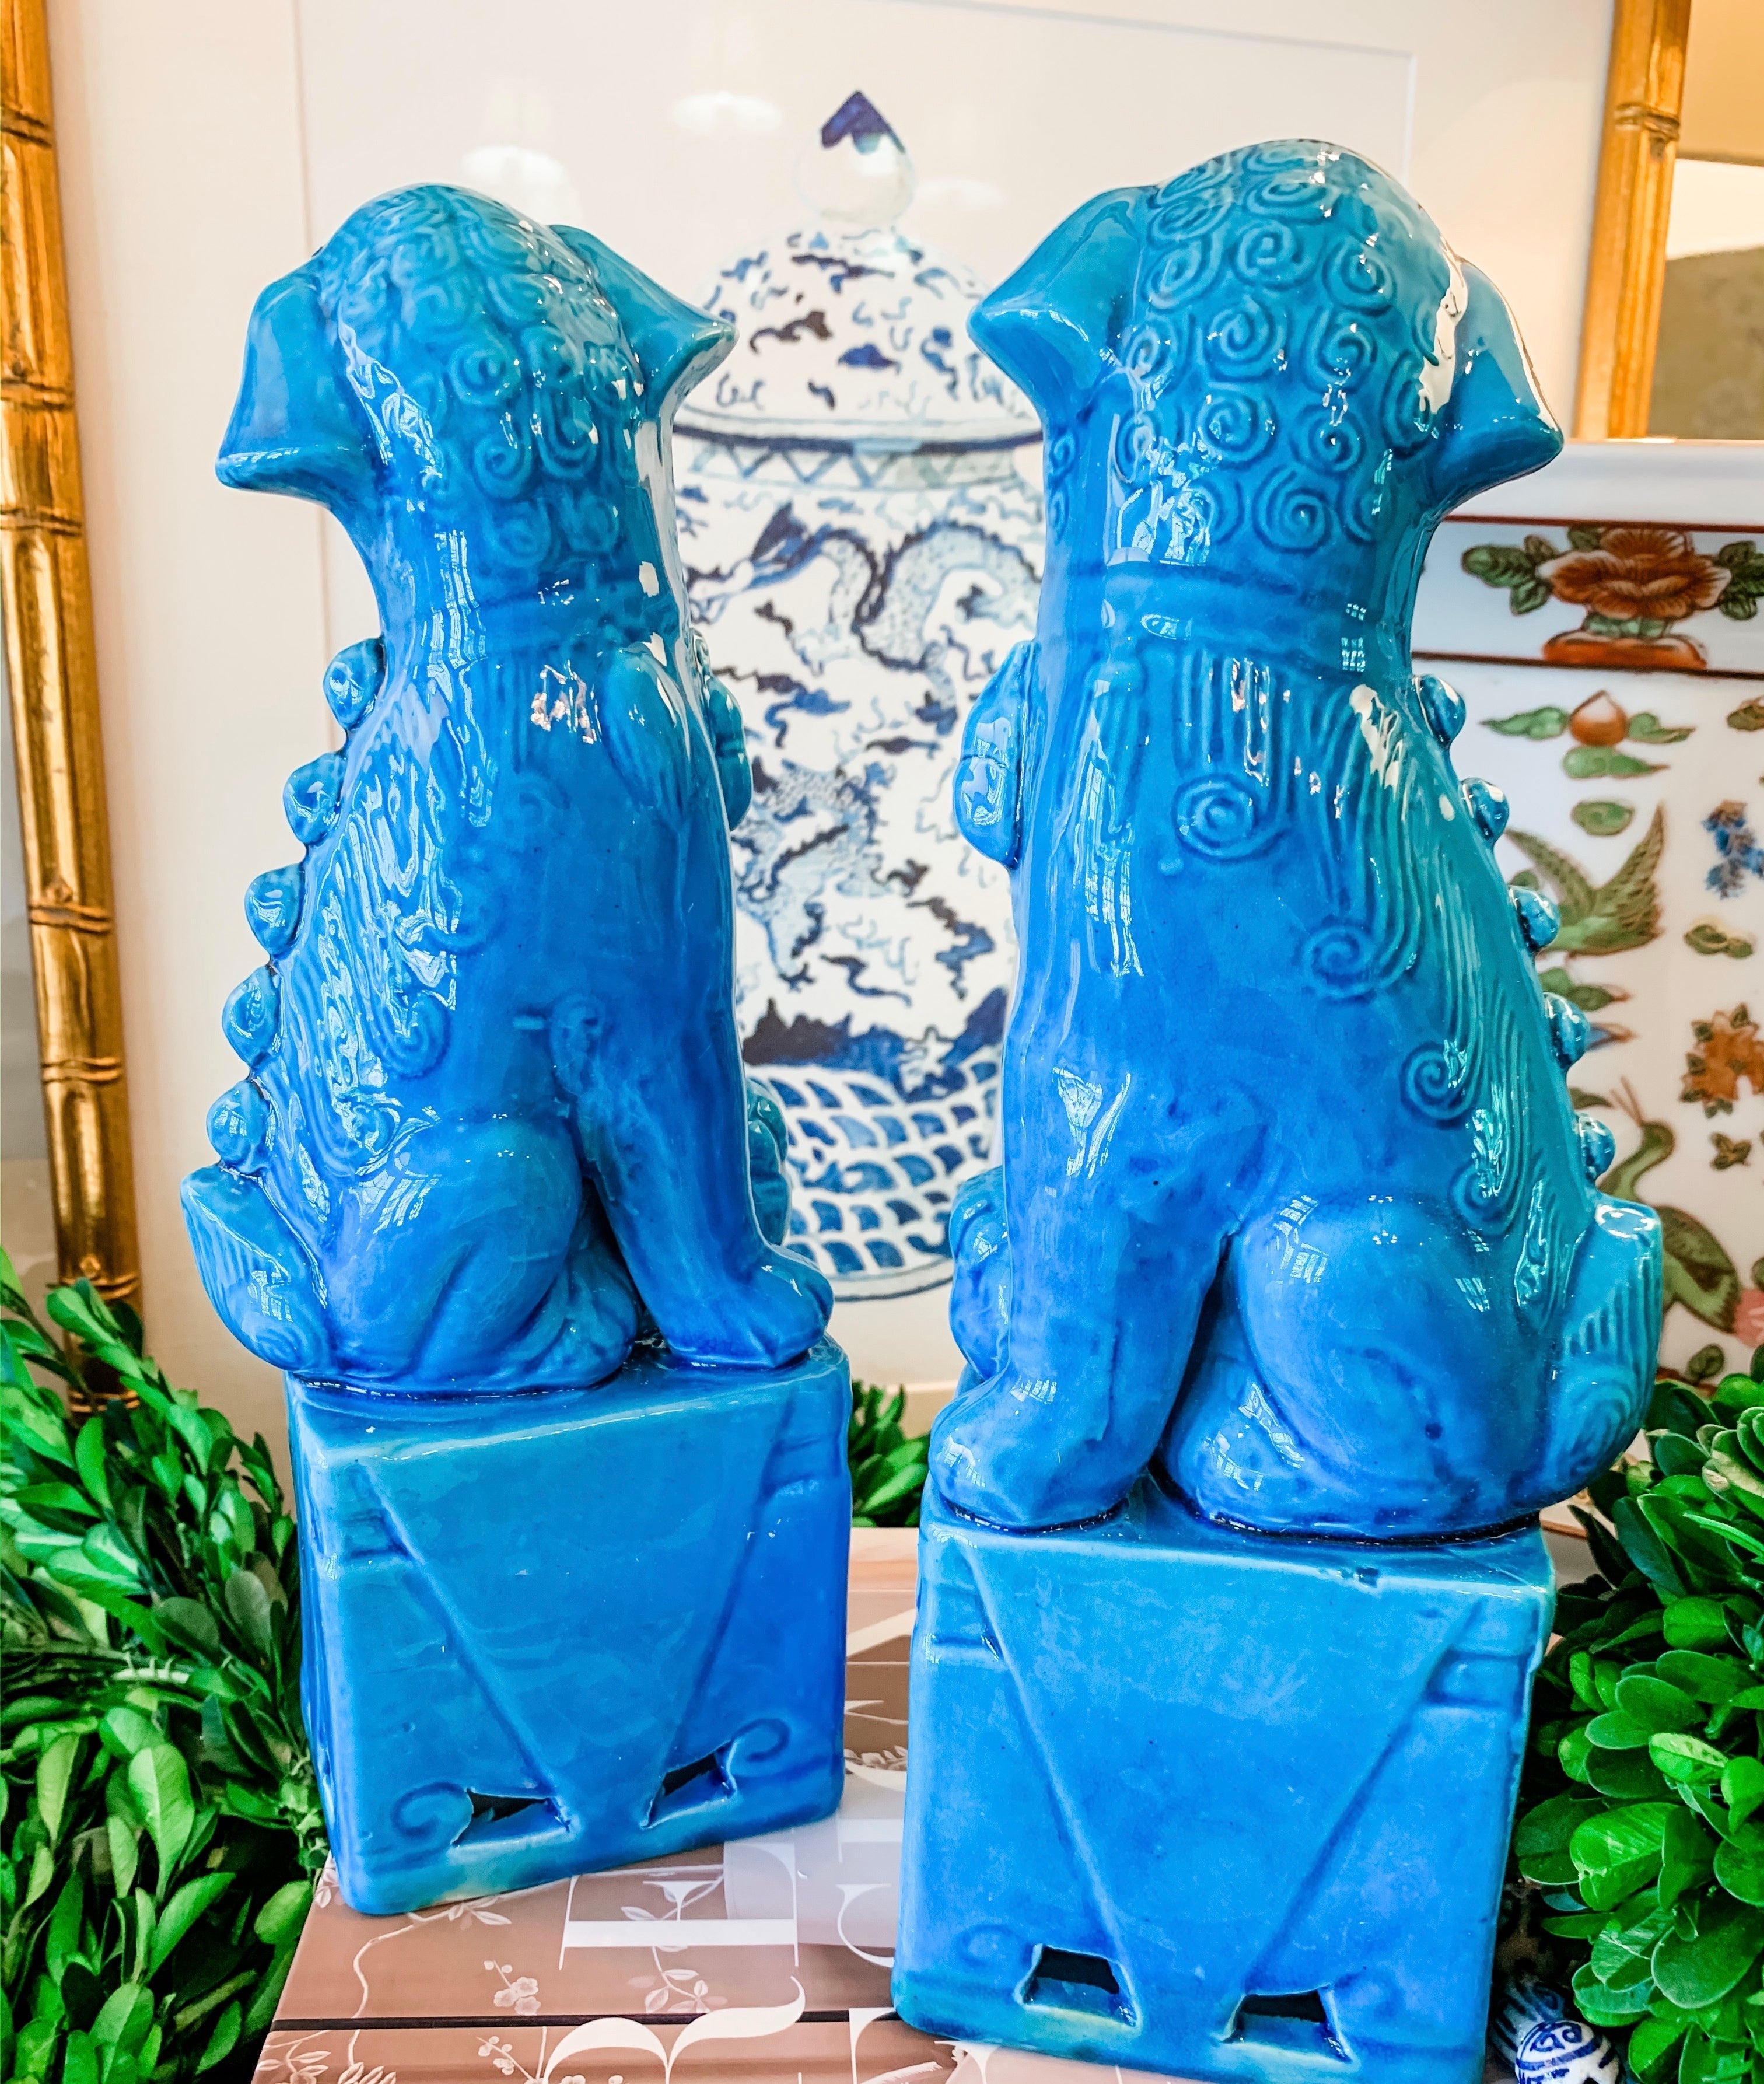 Pair of Beautiful Turquoise Foo Dog Figurines, 10” - Collectible Brooks